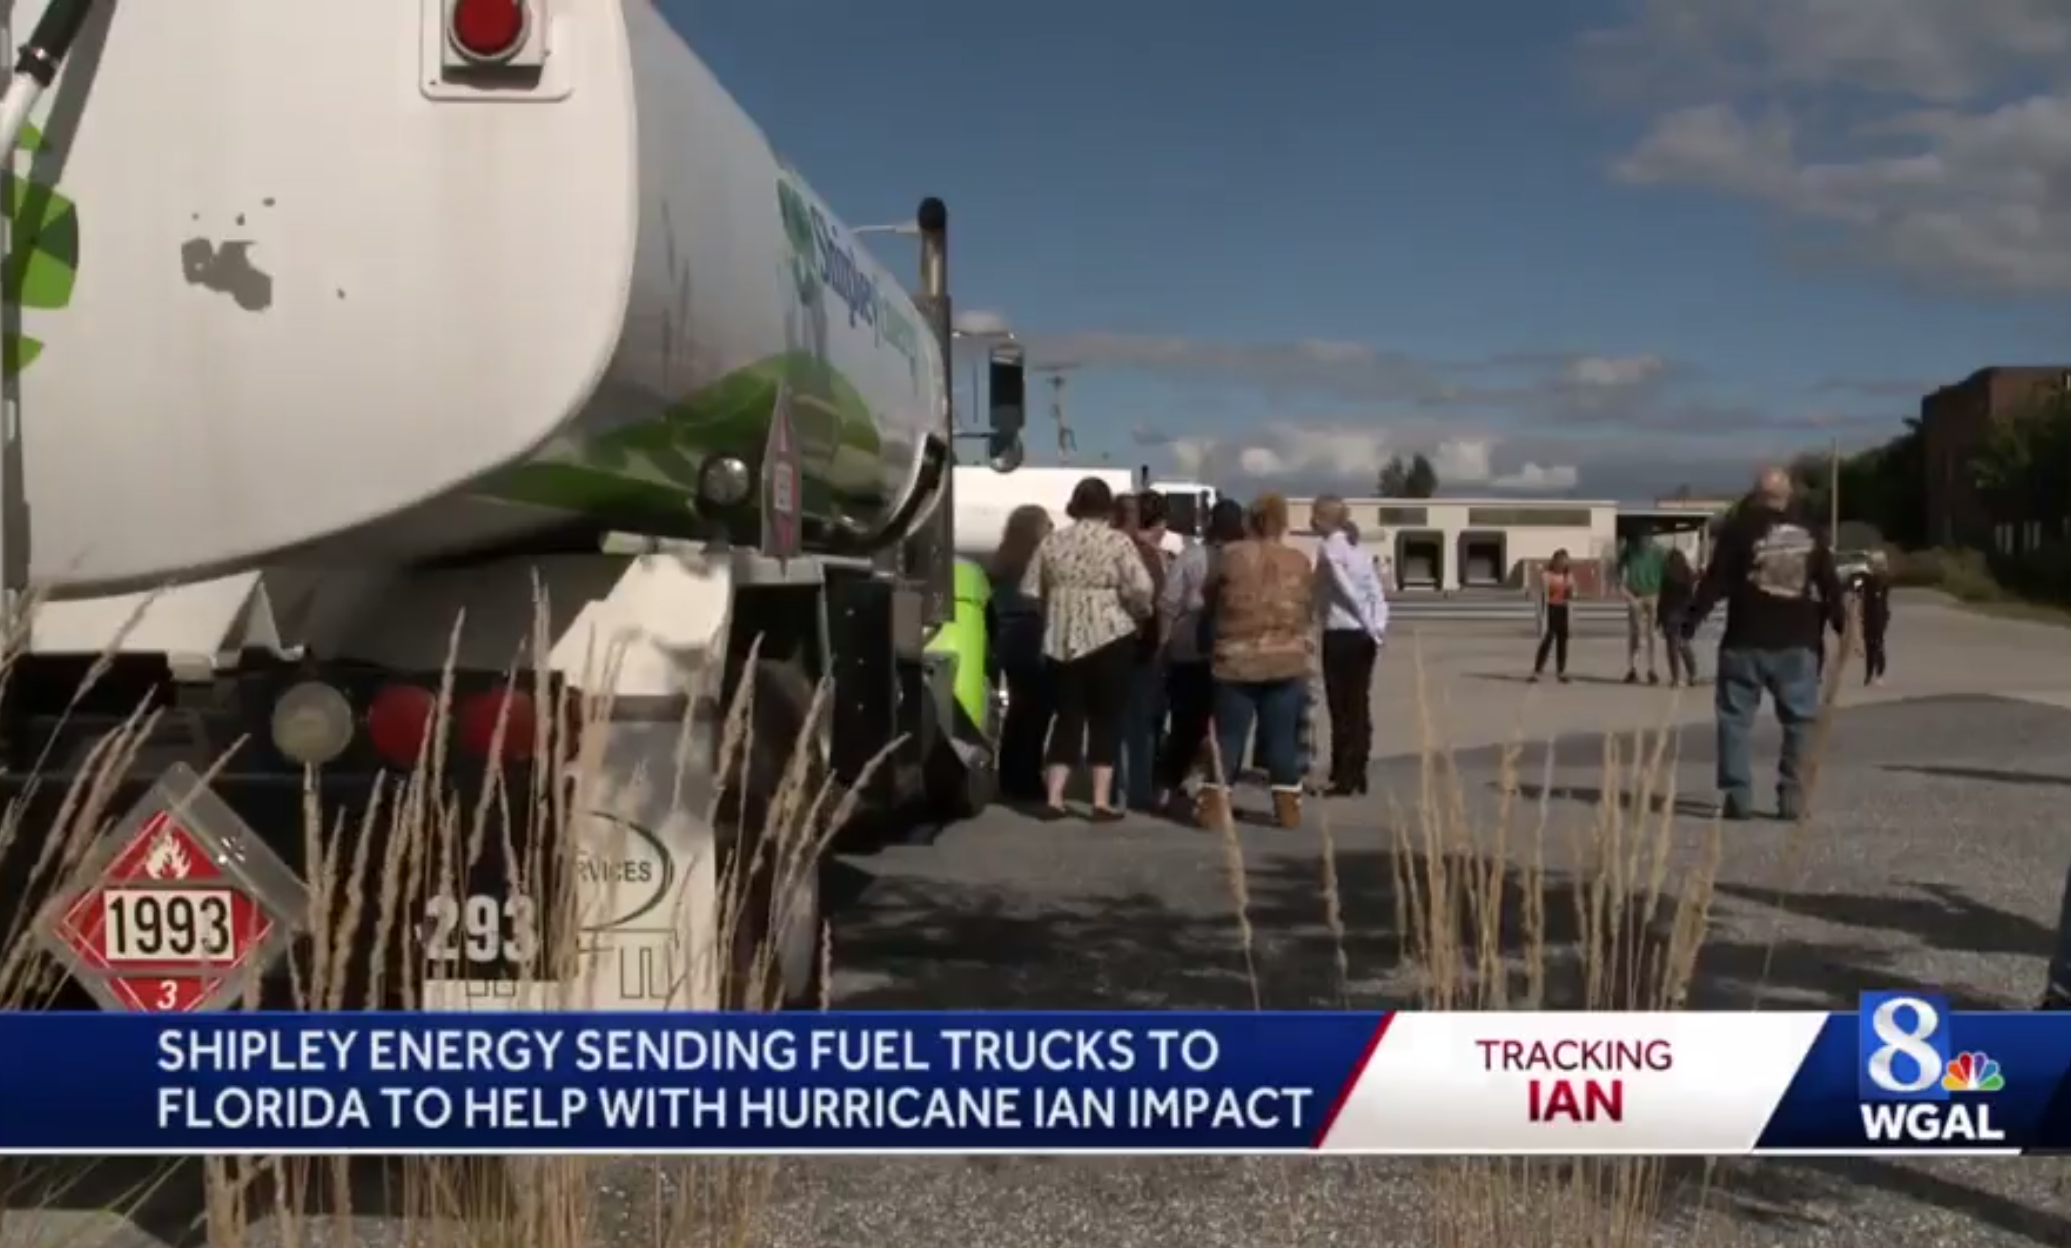 Shipley Energy sends fuel trucks to help with Hurricane Ian relief